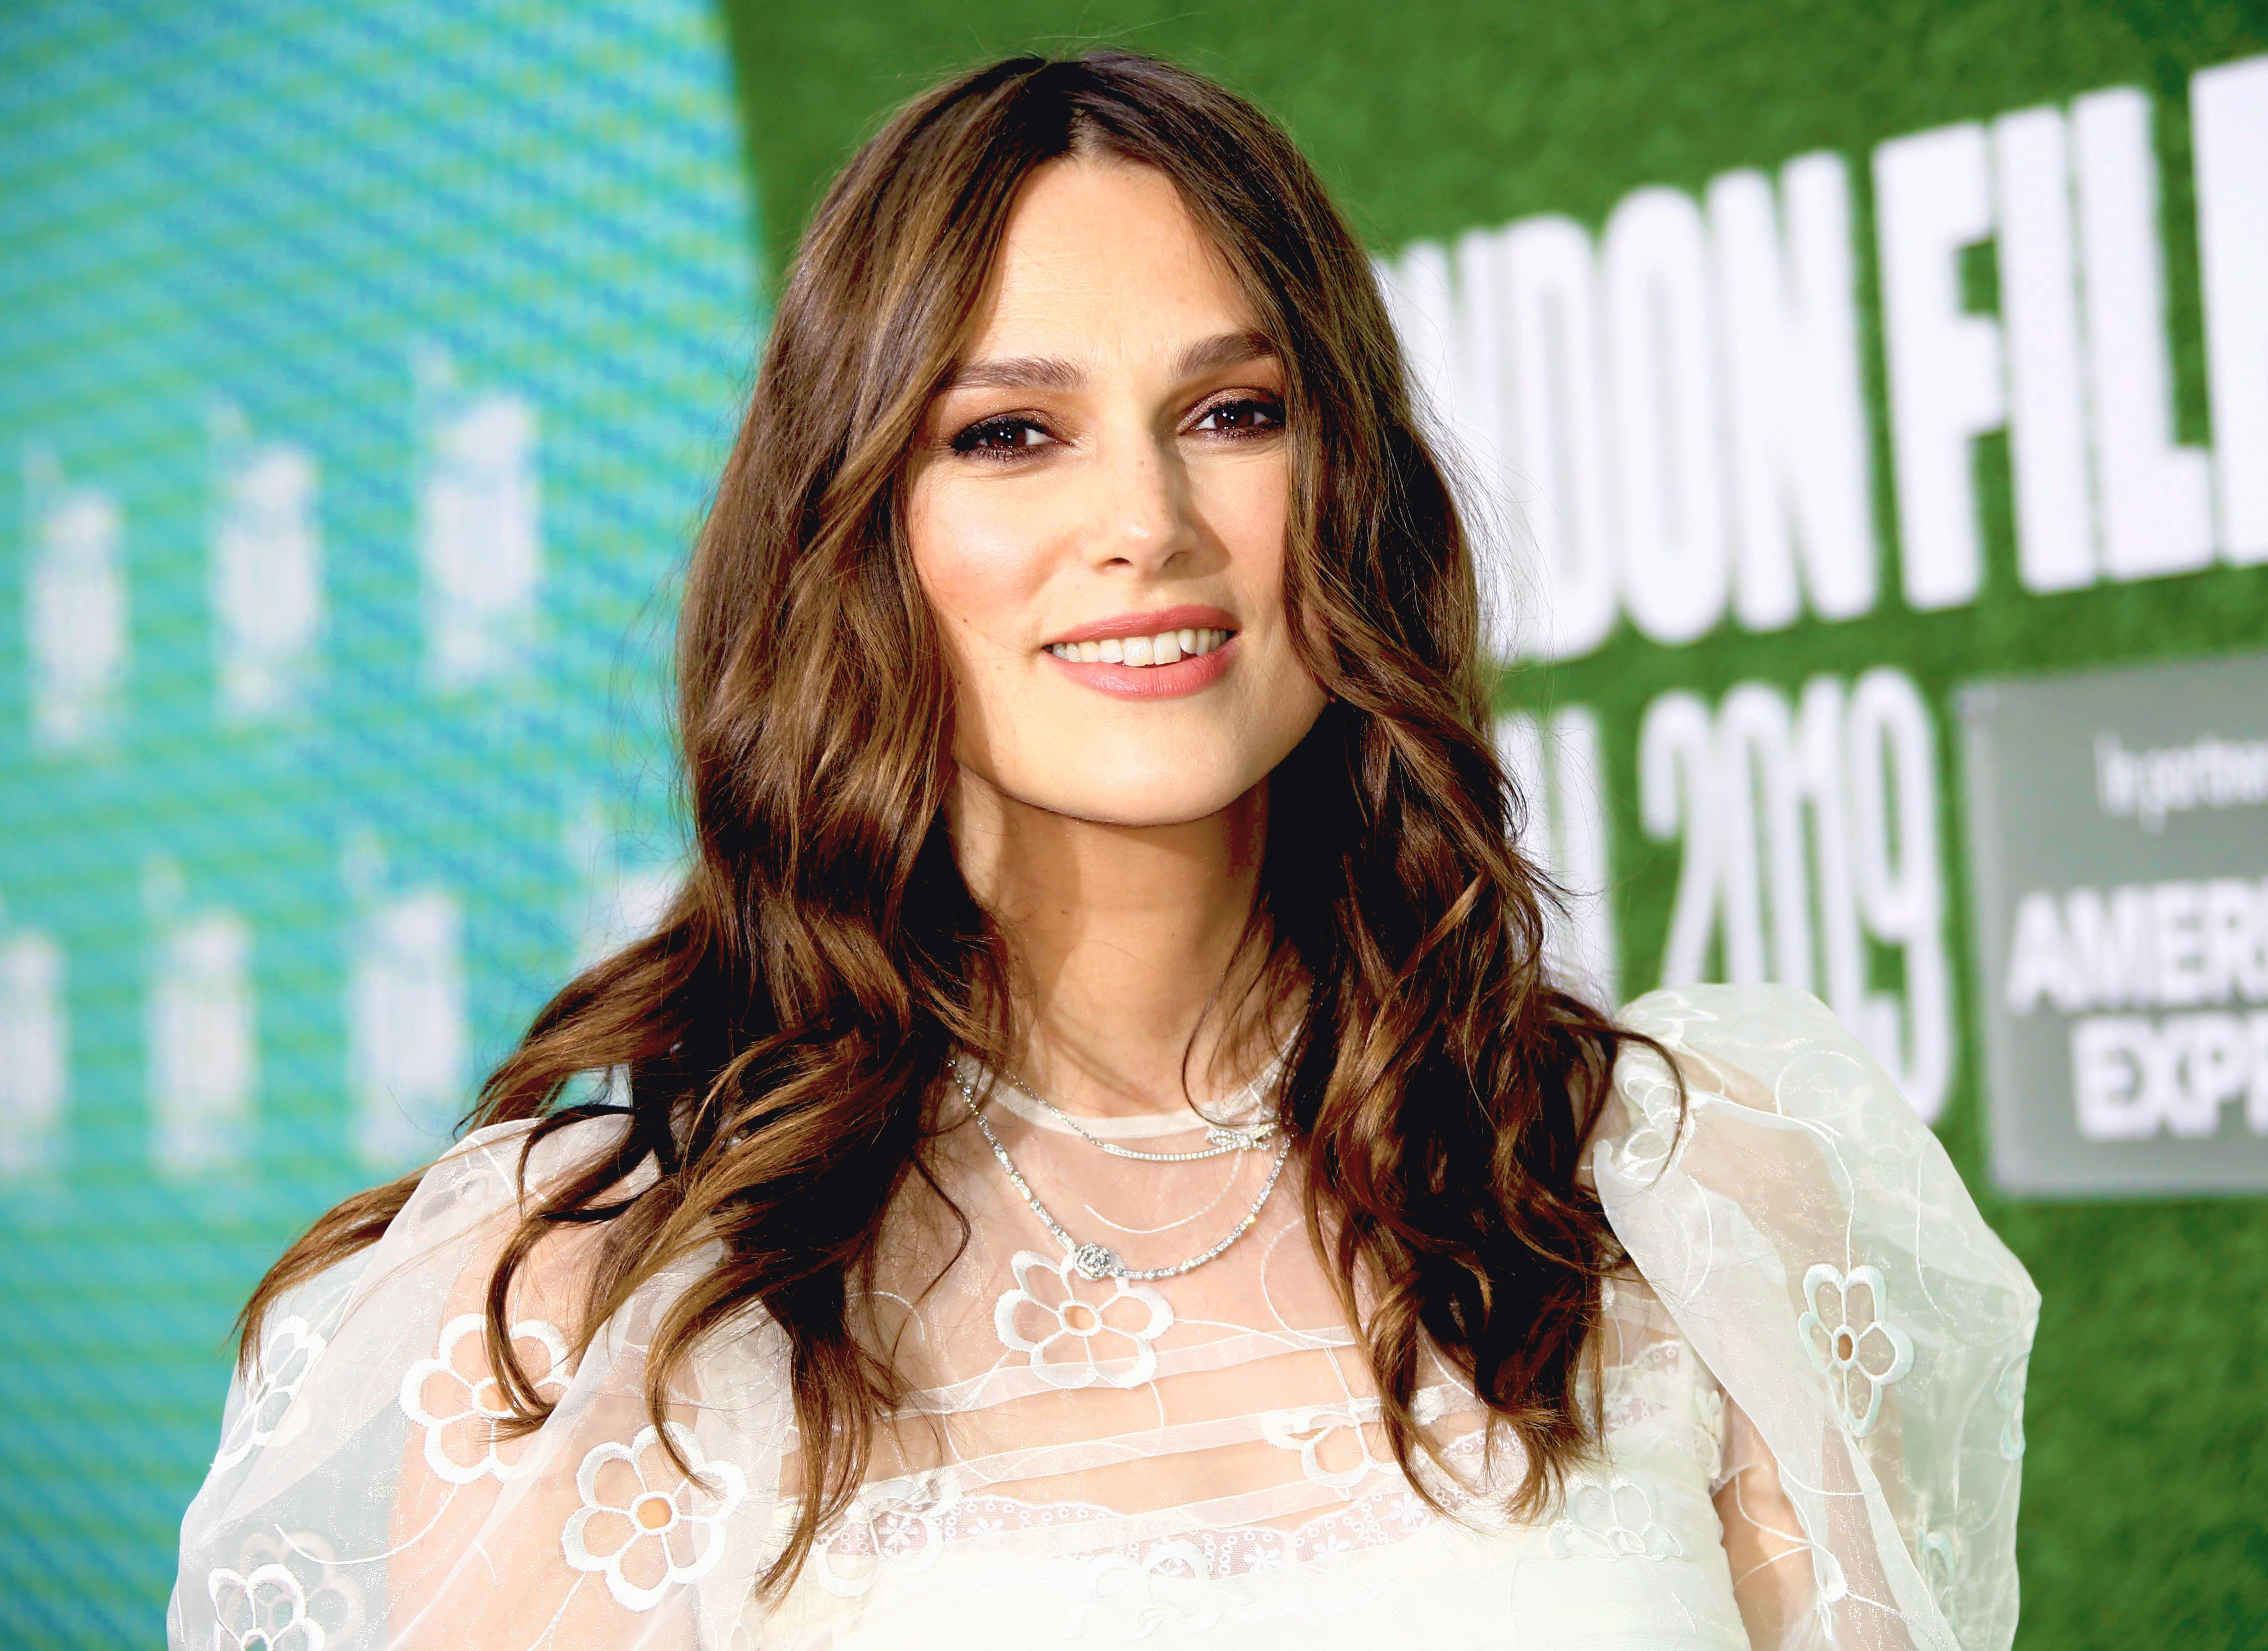 Nude Beach 2013 - Keira Knightley Refuses to Do Nude Scenes After Welcoming 2 Kids